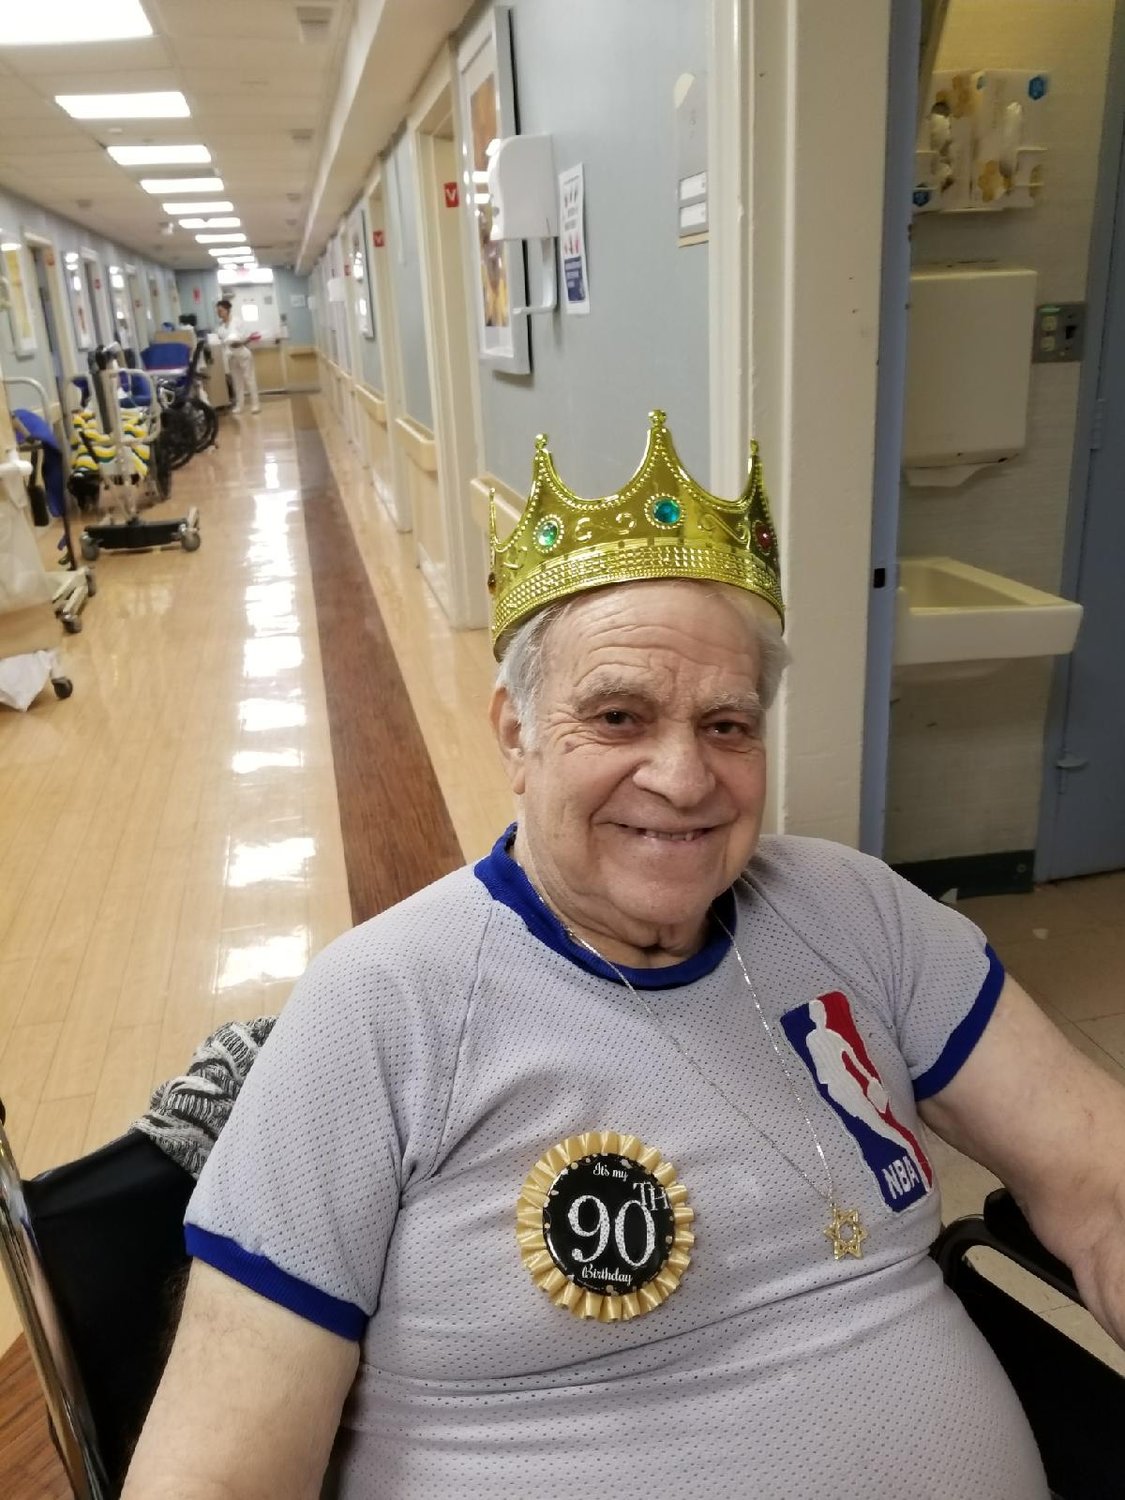 Manny Sokol celebrating his 90th birthday in a recreation of his NBA referee uniform at the Oceanside Care Center.